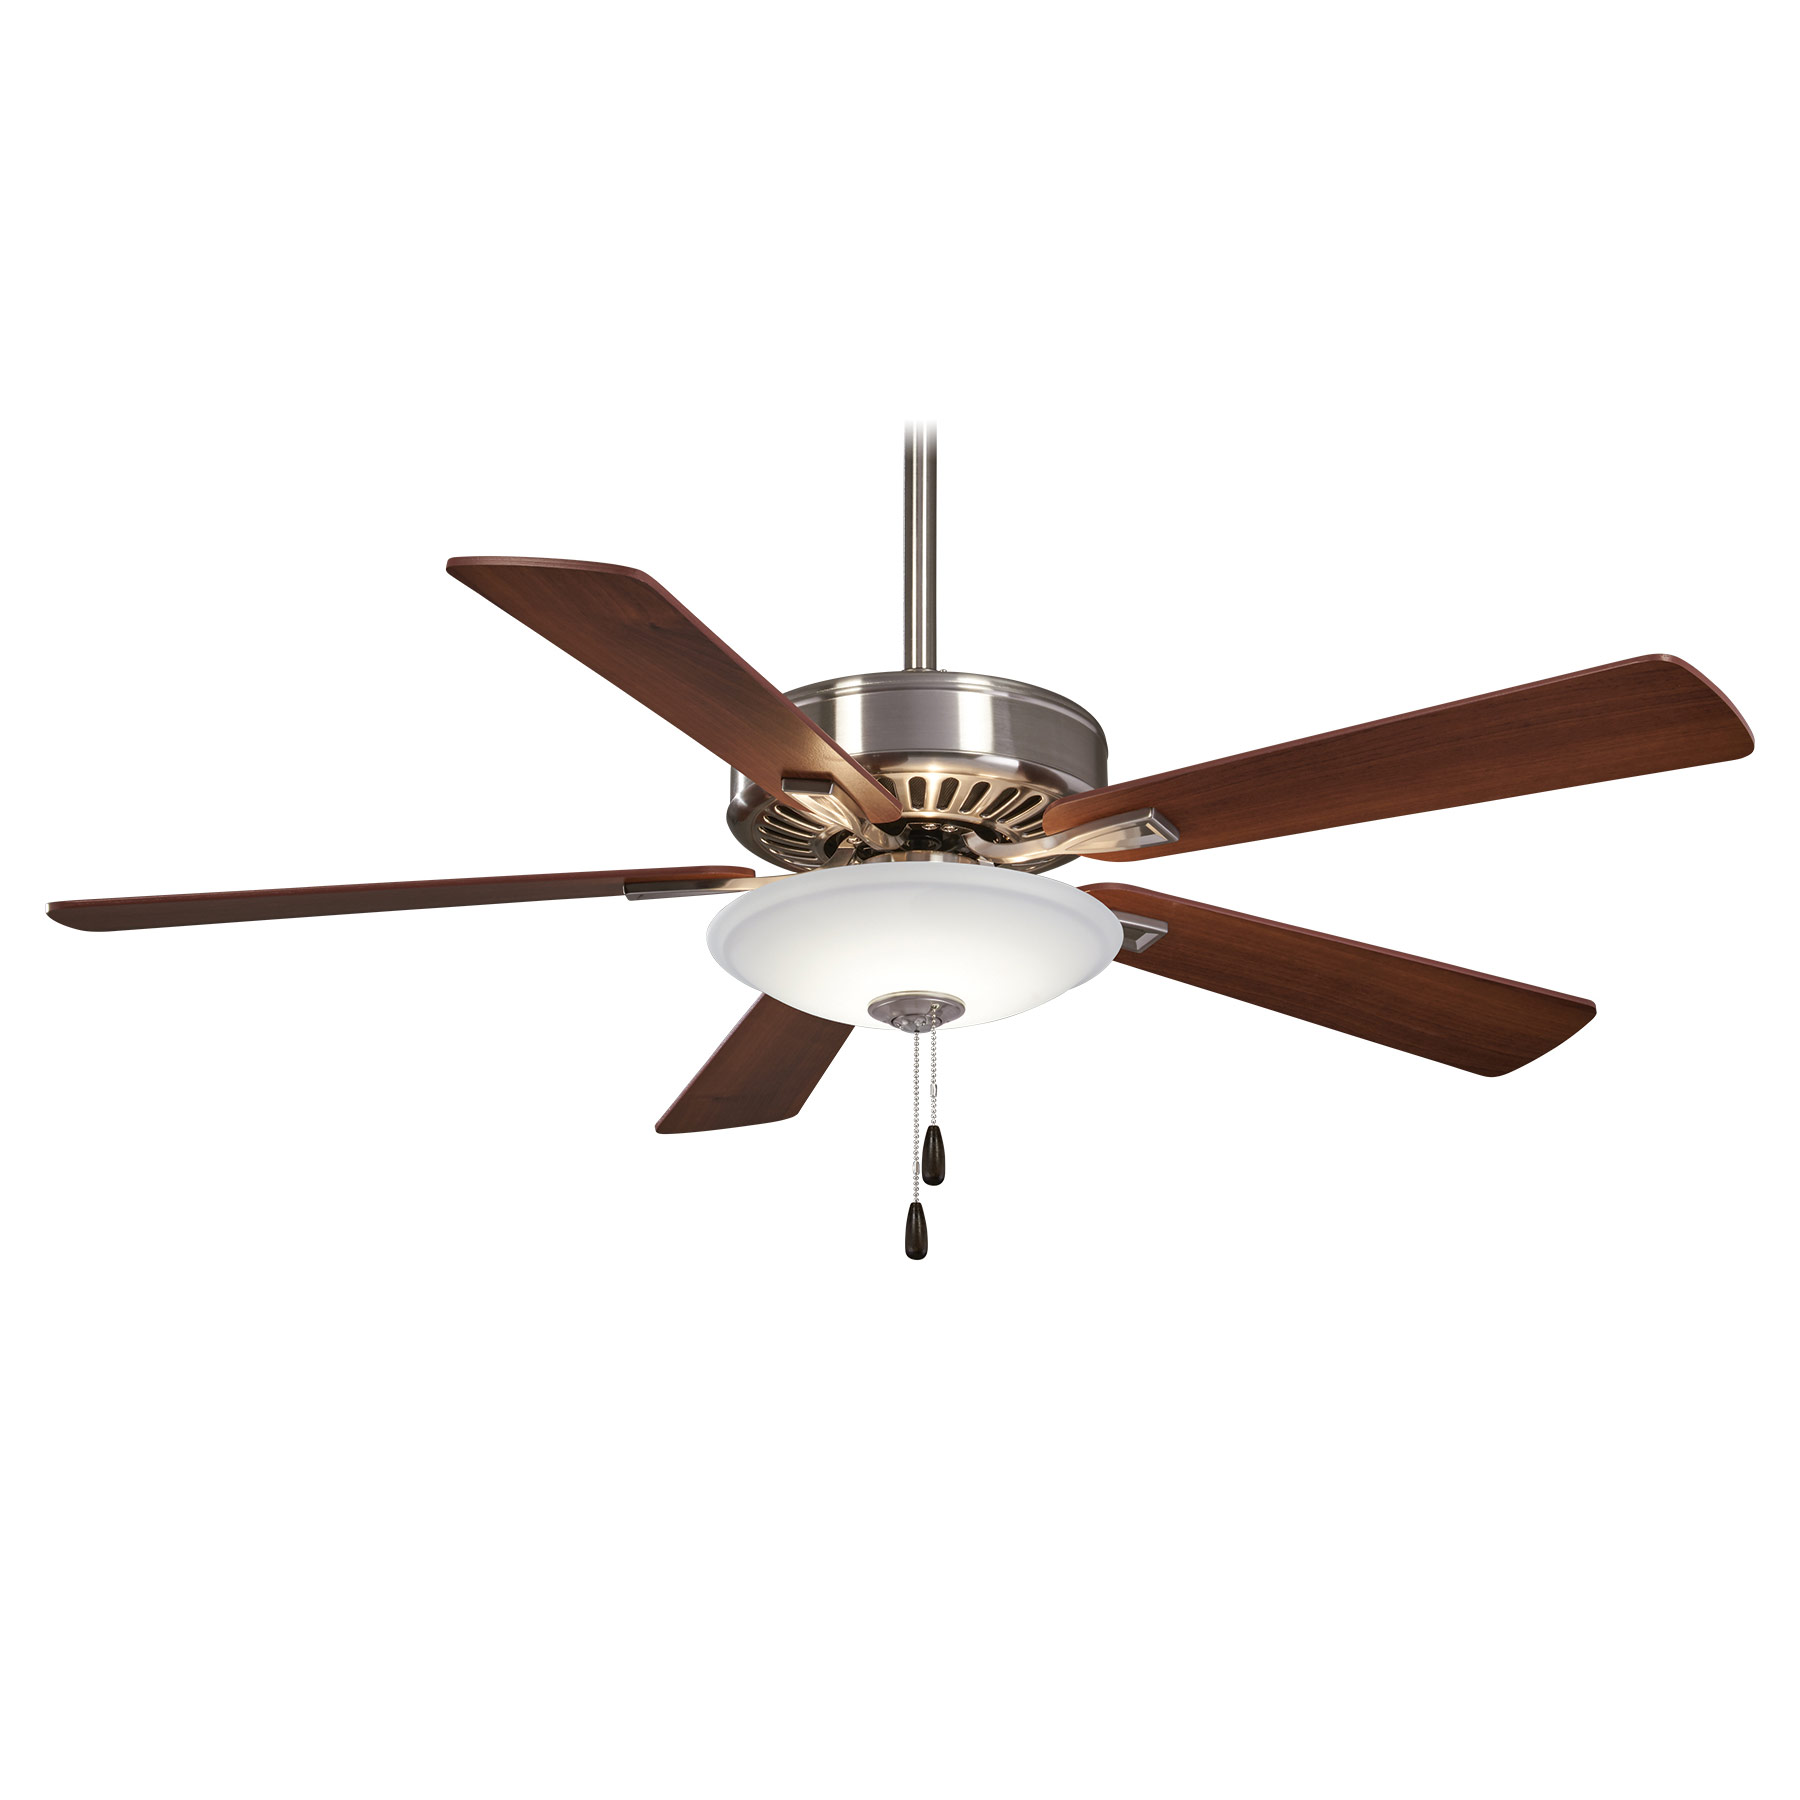 Contractor Uni-Pack Ceiling Fan with Light by Minka Aire F656L-BN/DW  MKA419144